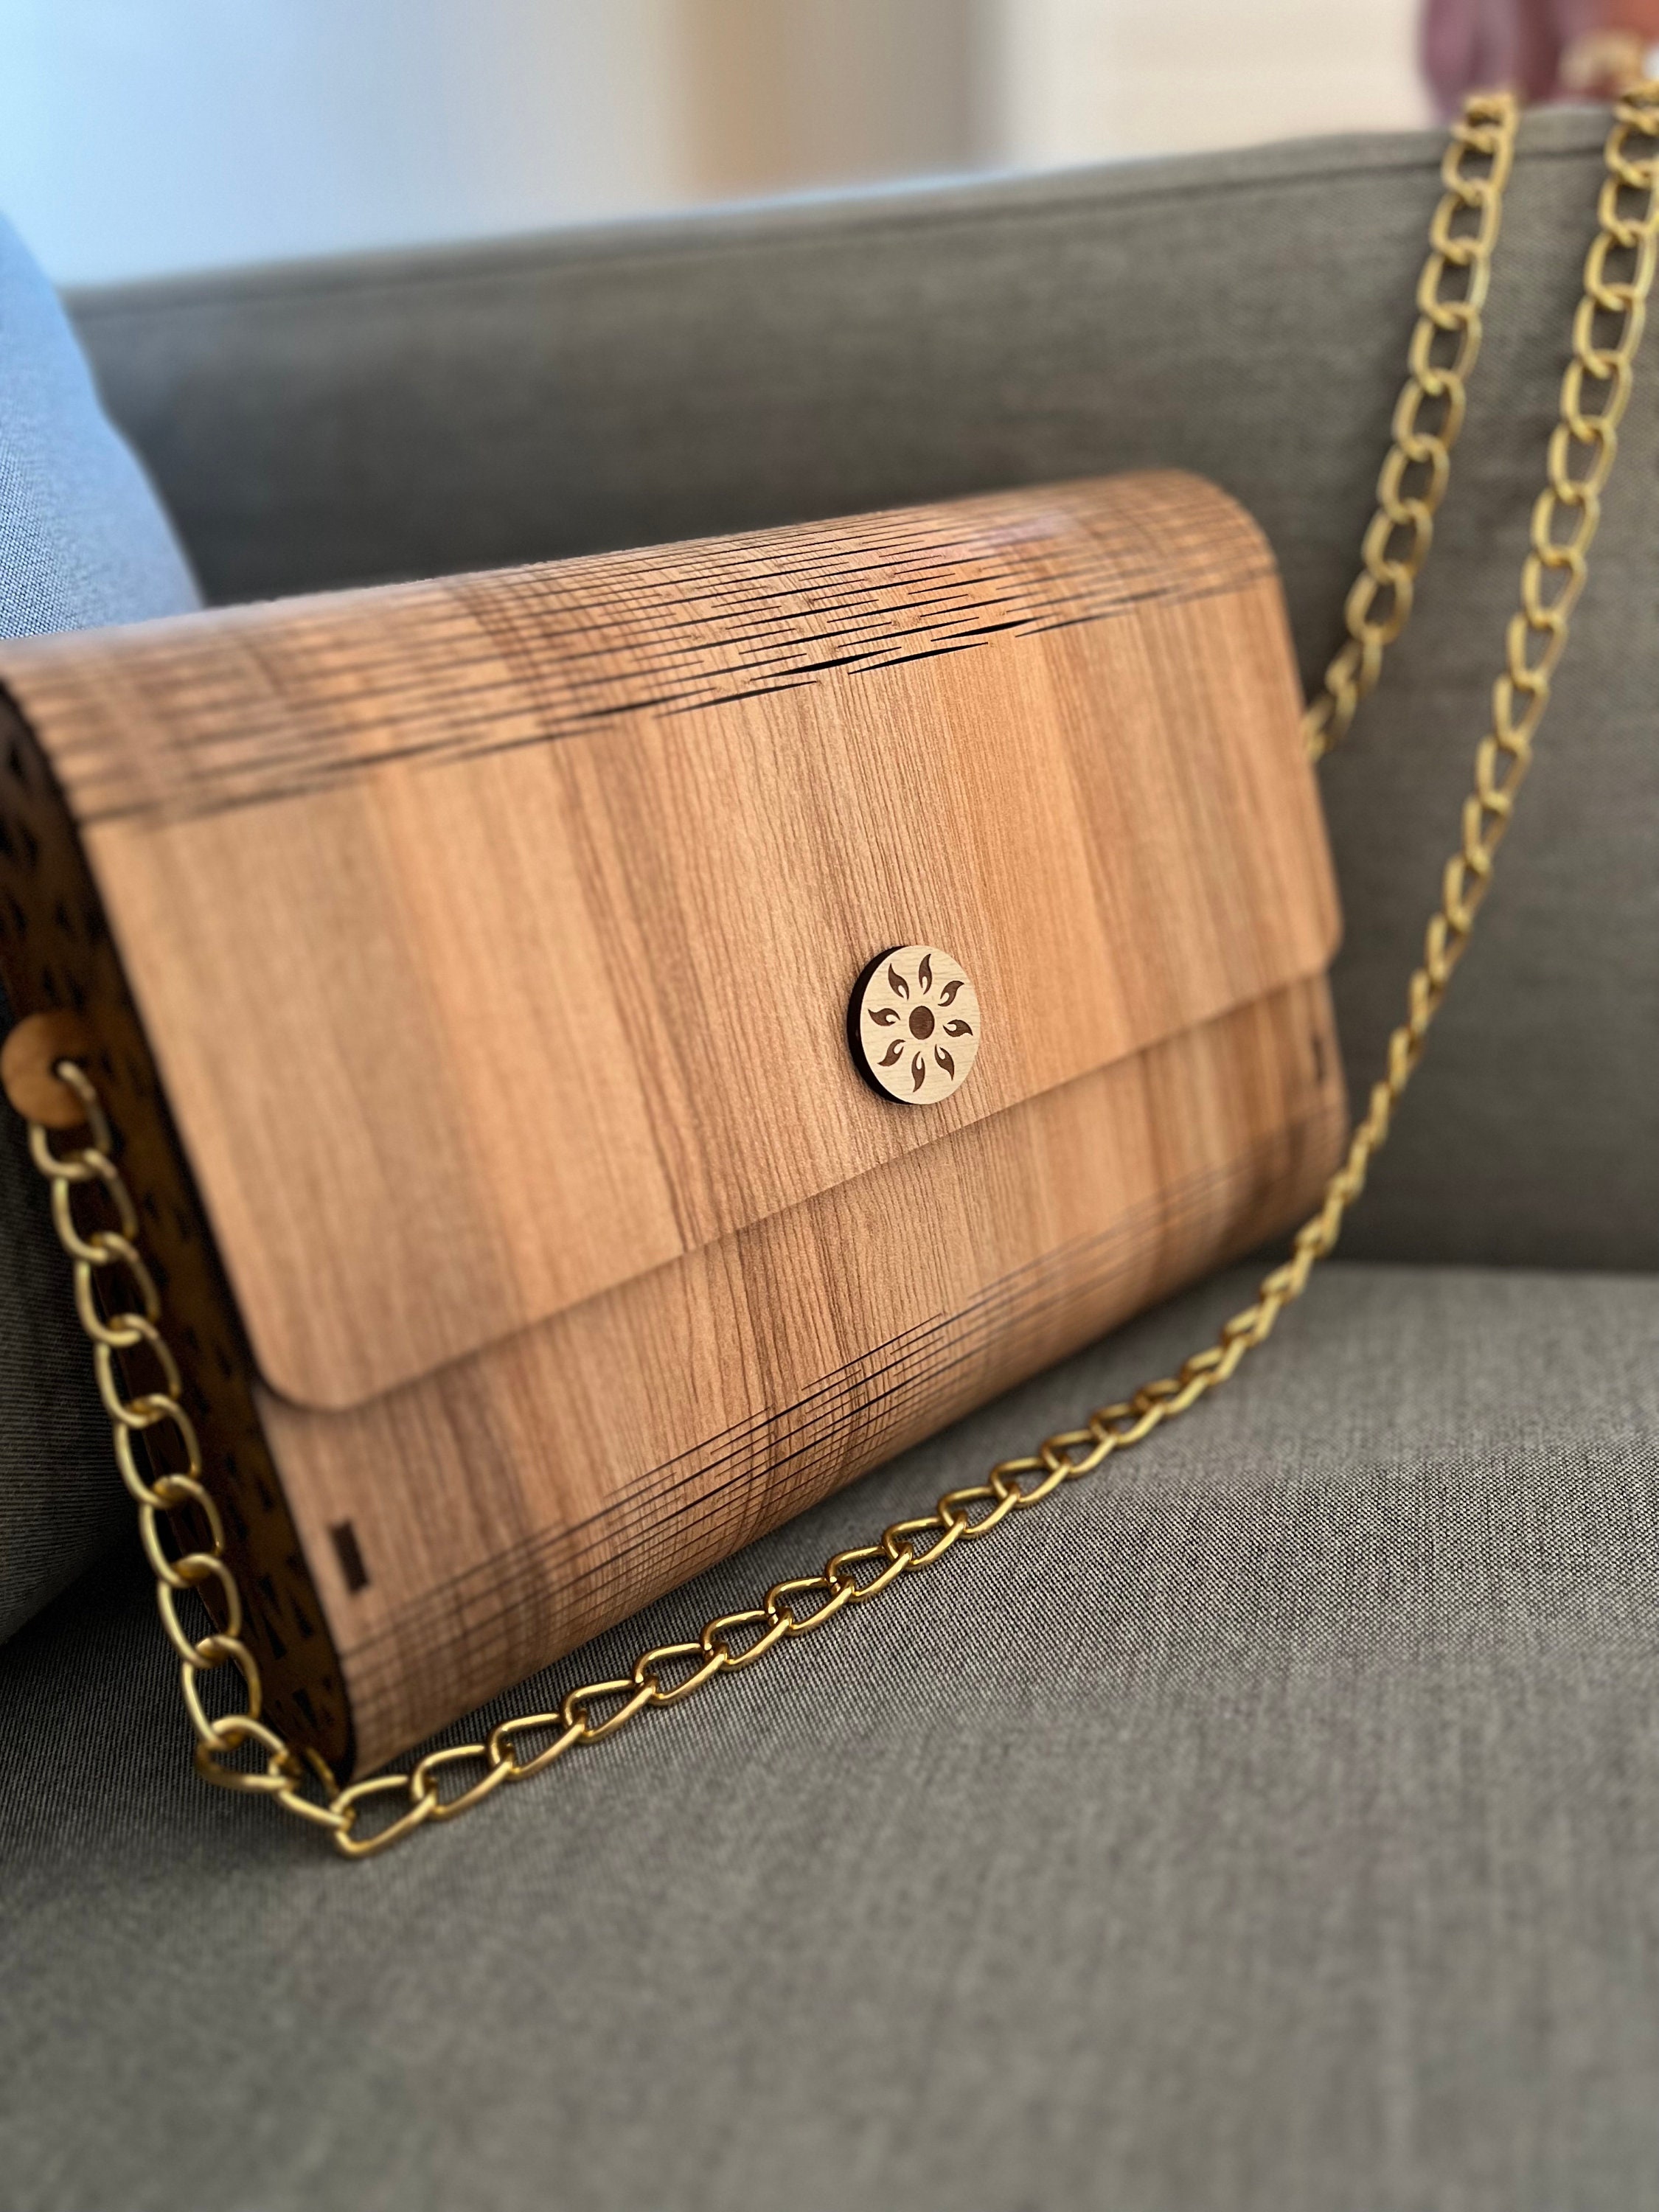 Leather Bags, Wallets and Coin Purses – Designed For Joy